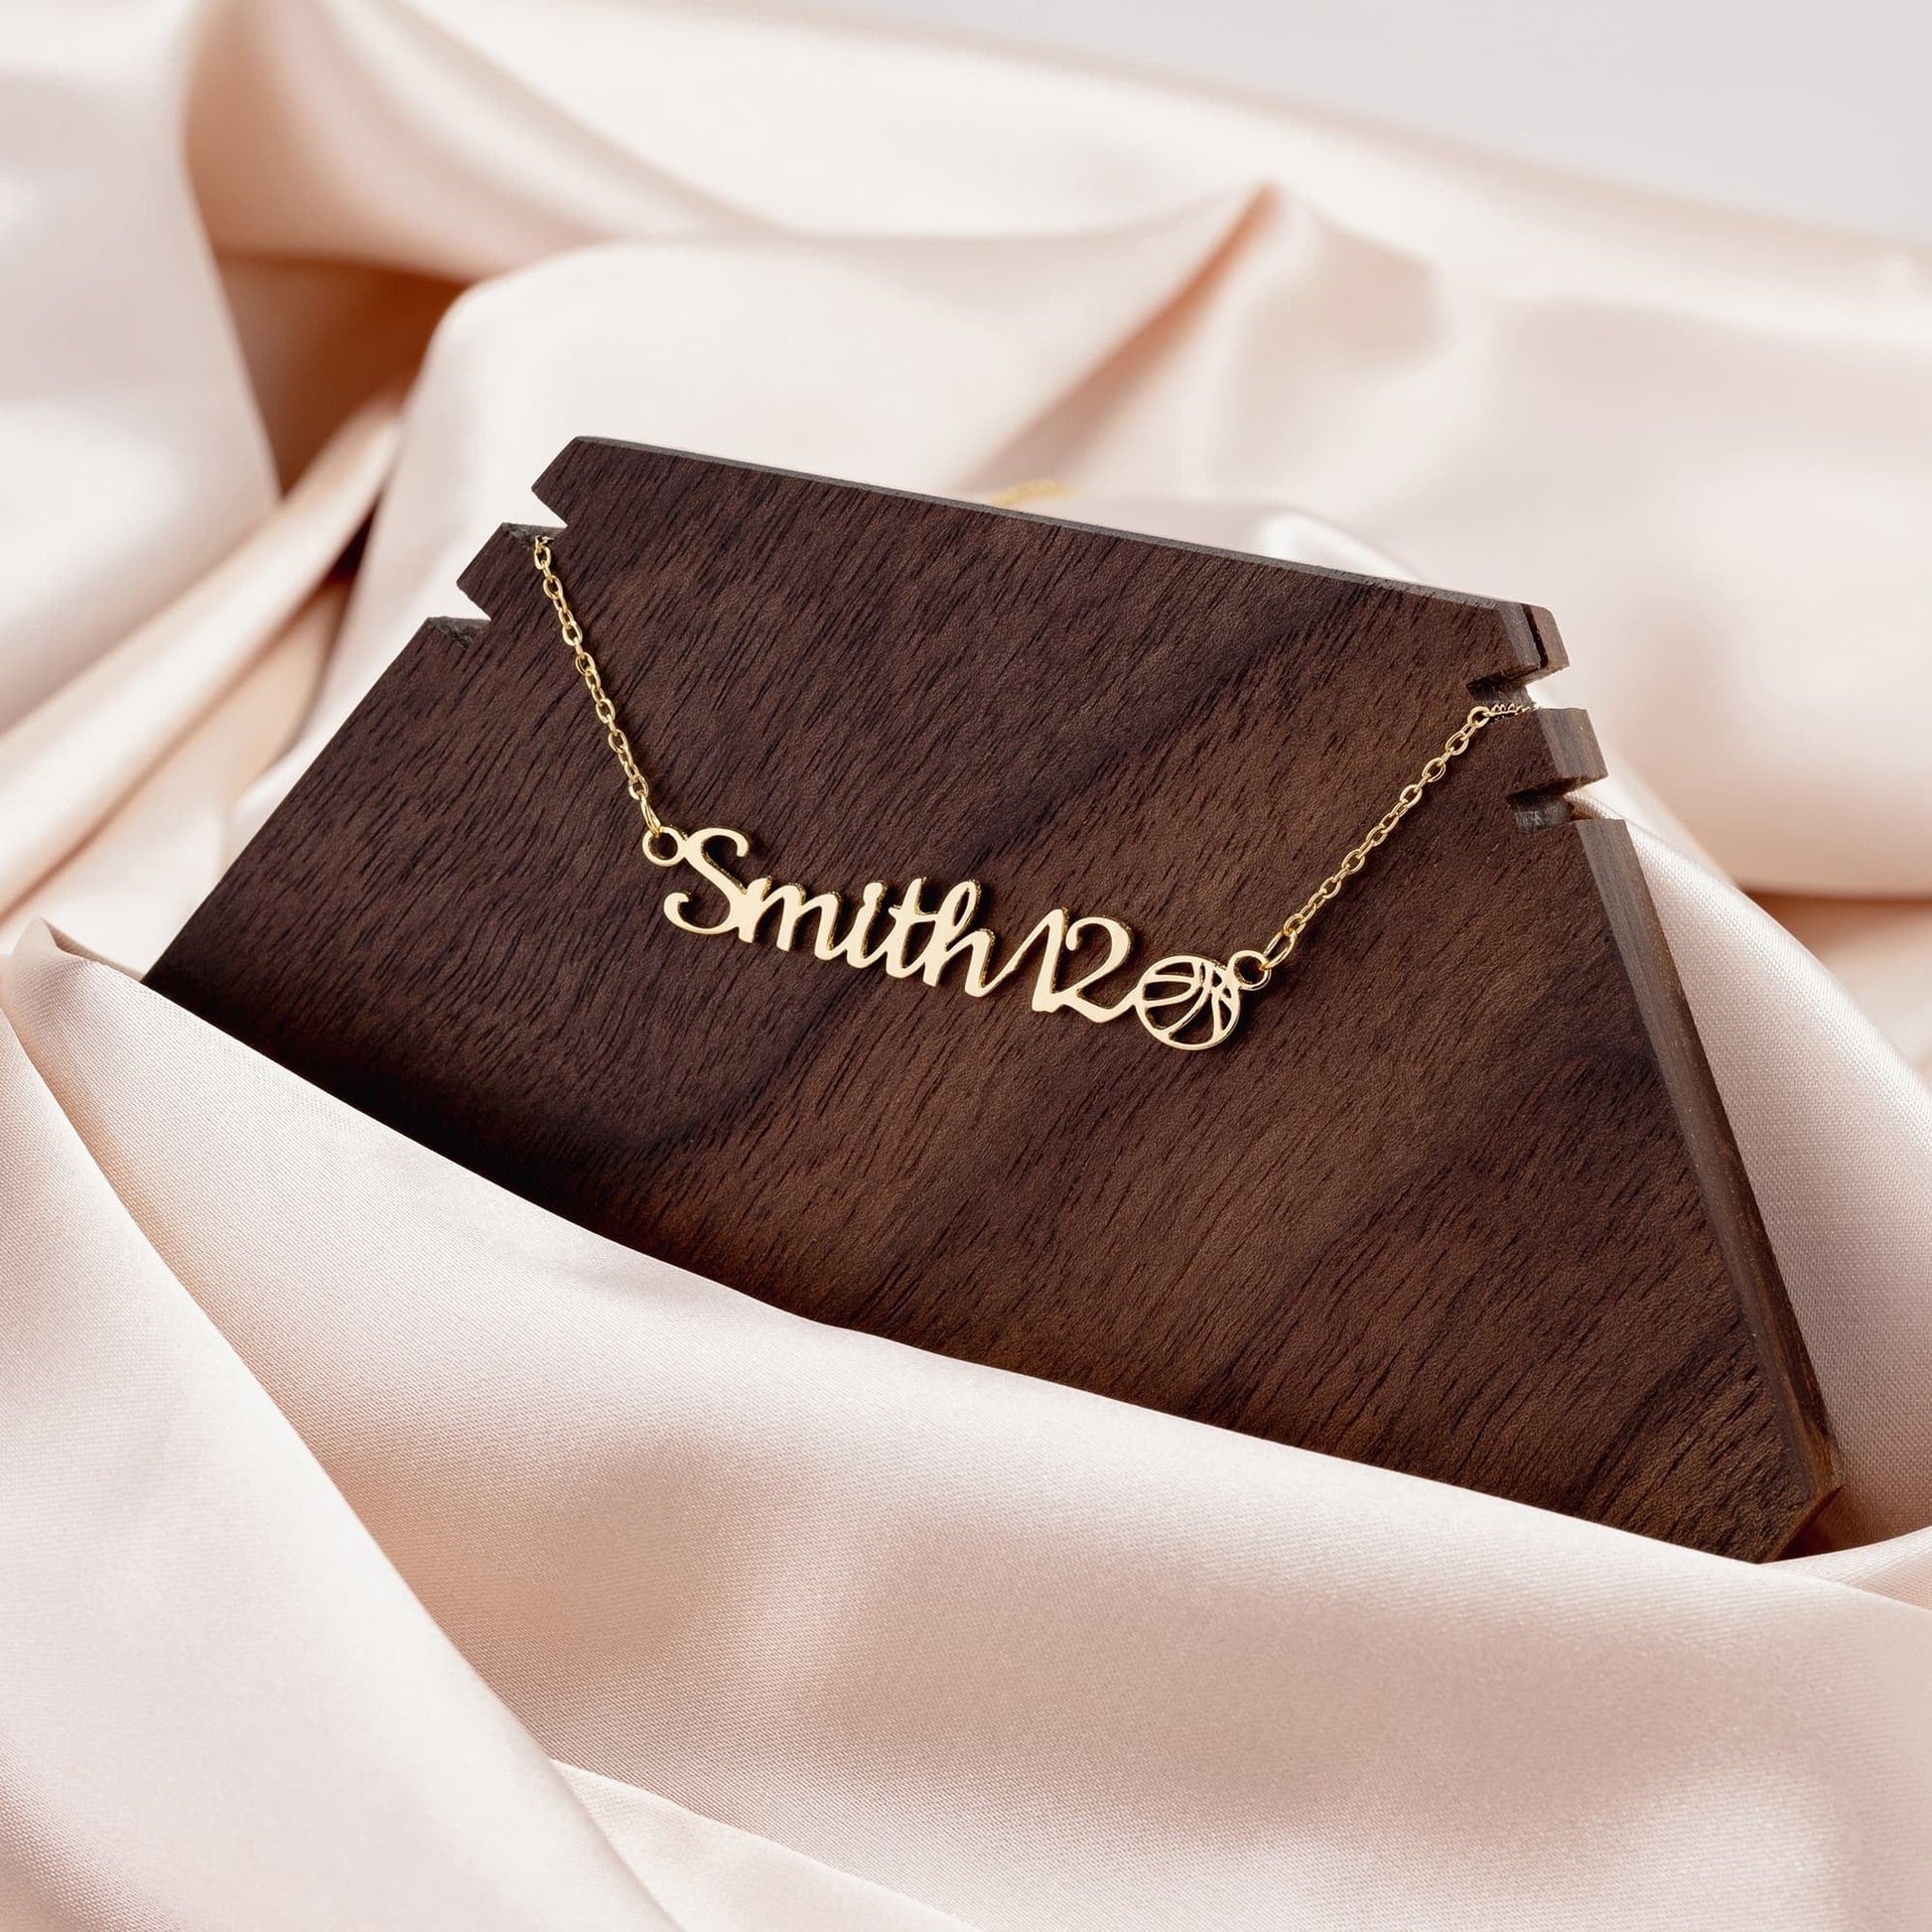 Personalized necklace for sports - The muggin shop